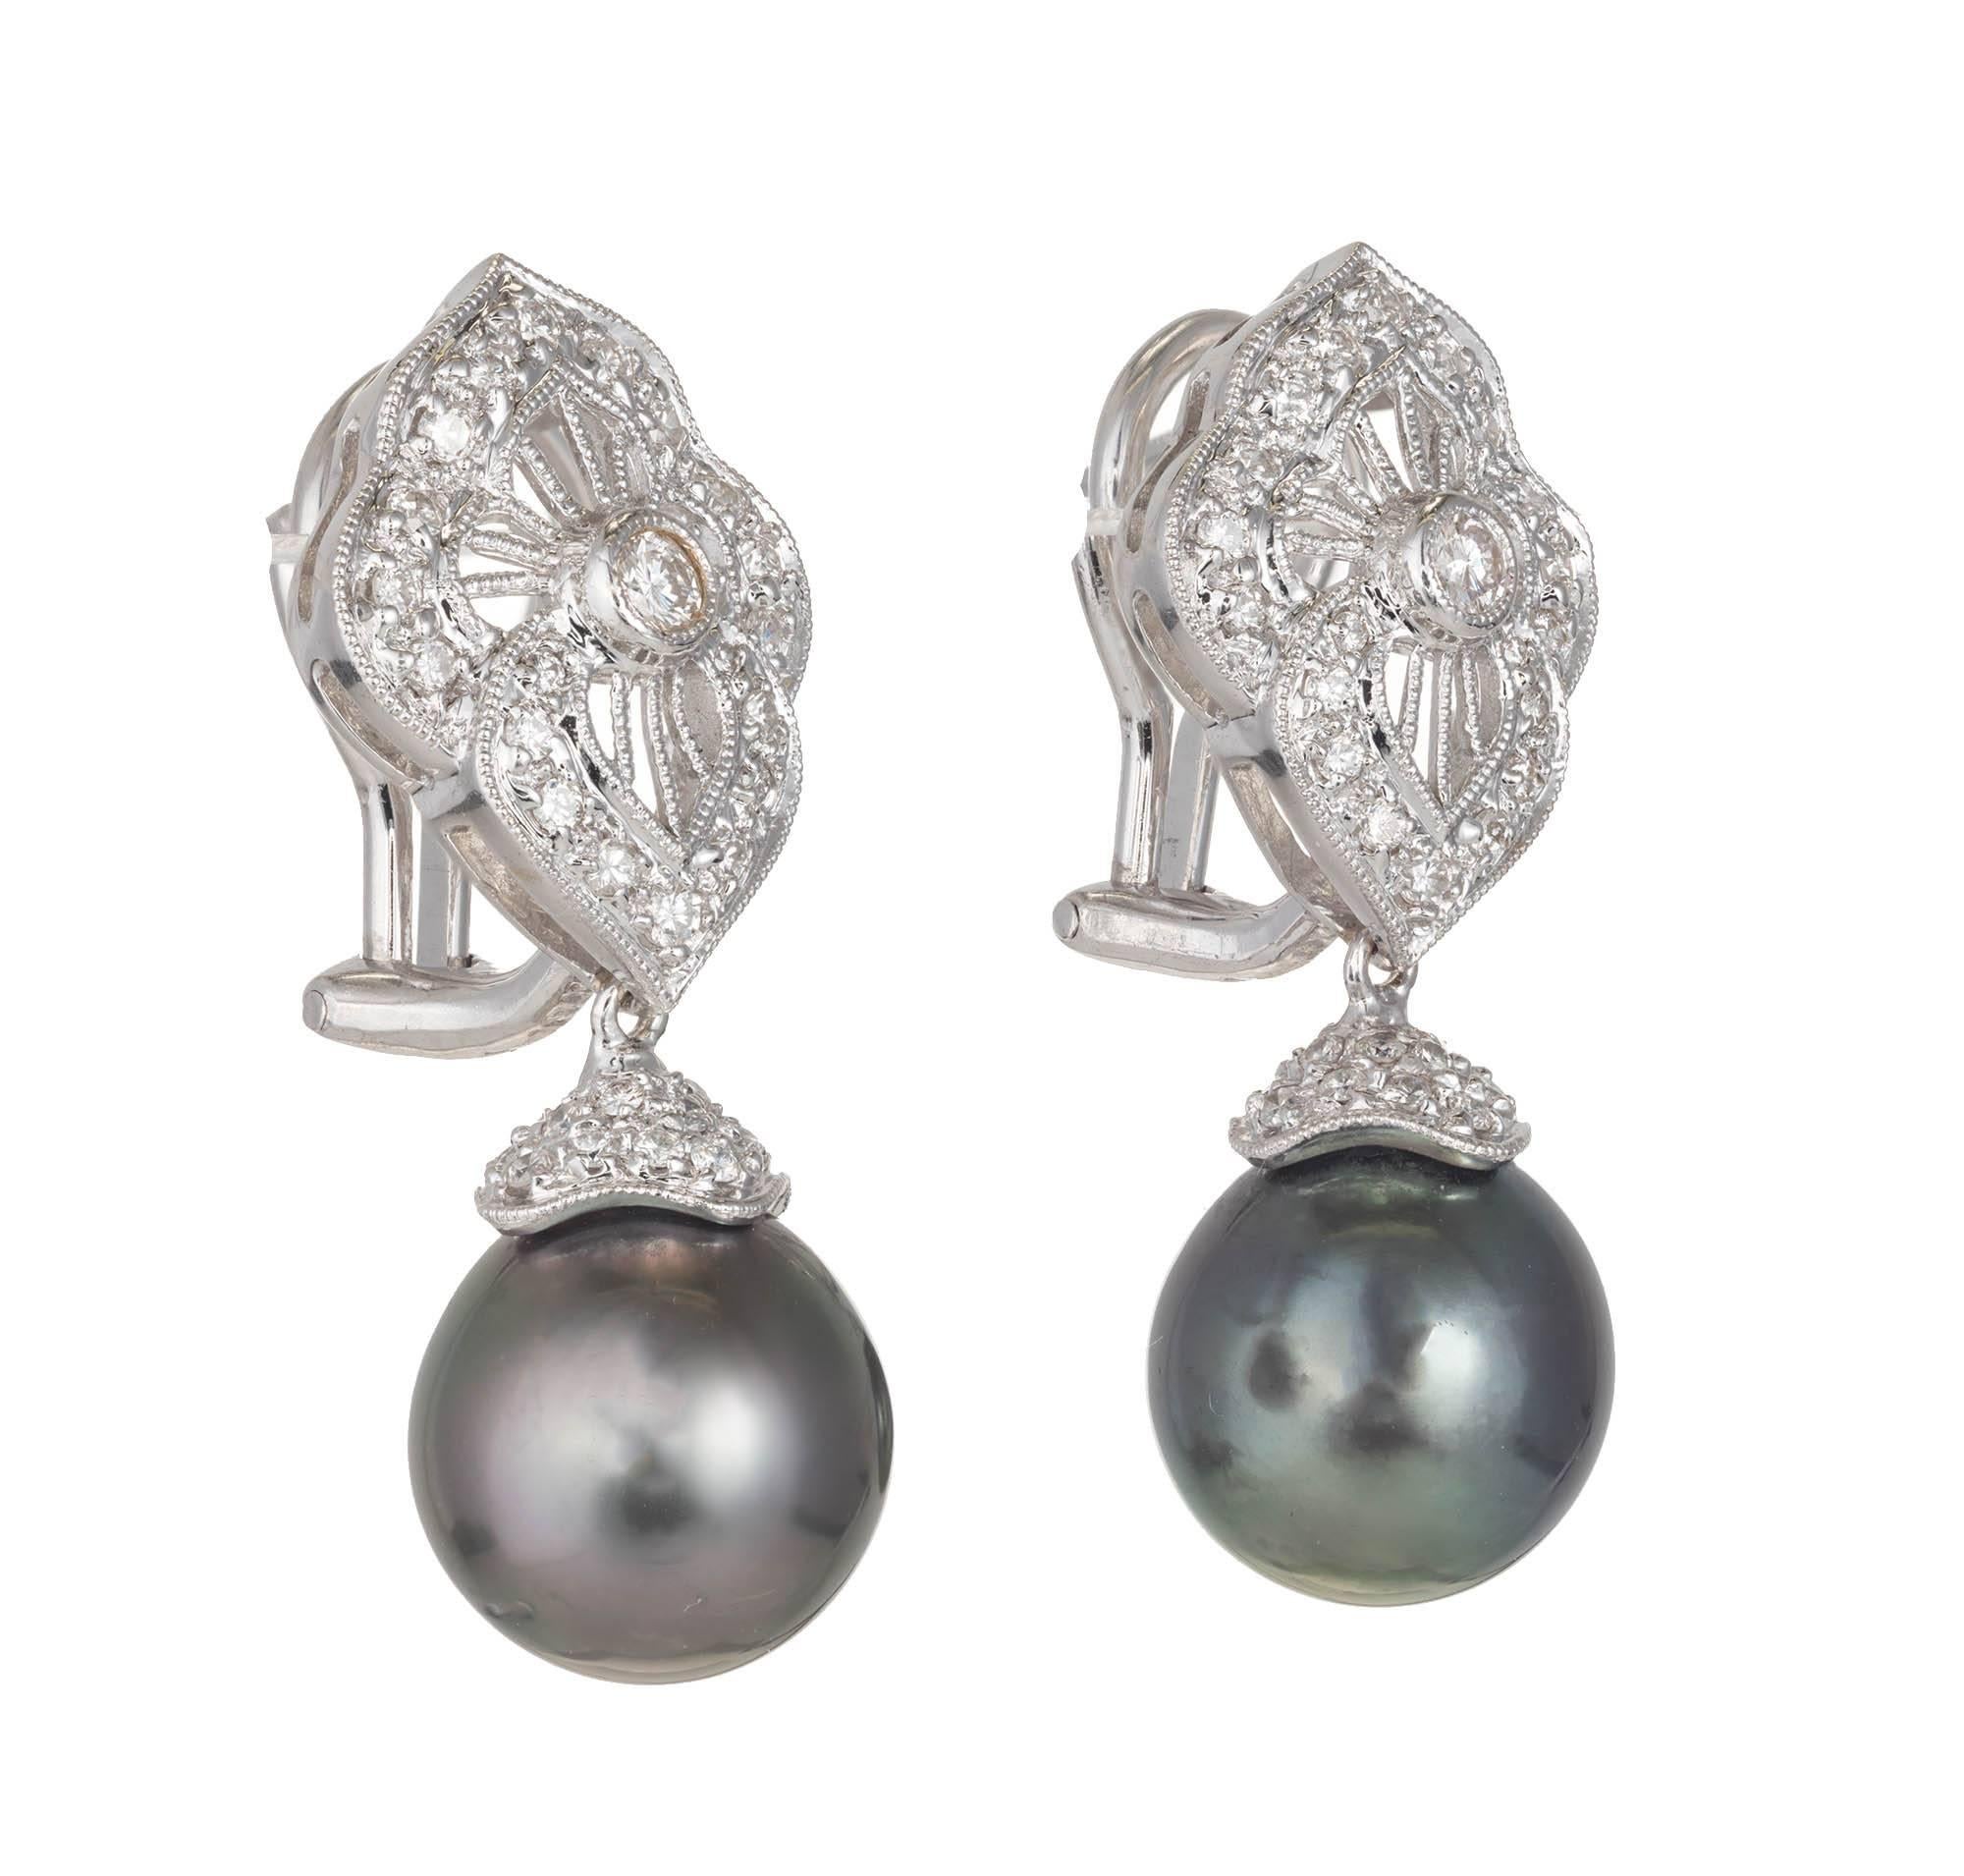 Black South Sea and diamond dangles earrings. 18k white gold with . Beautiful white sparkly diamonds, Clip post style.

2 round diamonds, .05ct each, approx. total weight .10cts
2 South Sea black pearls, 10.45mm, excellent lustre
84 round diamonds,